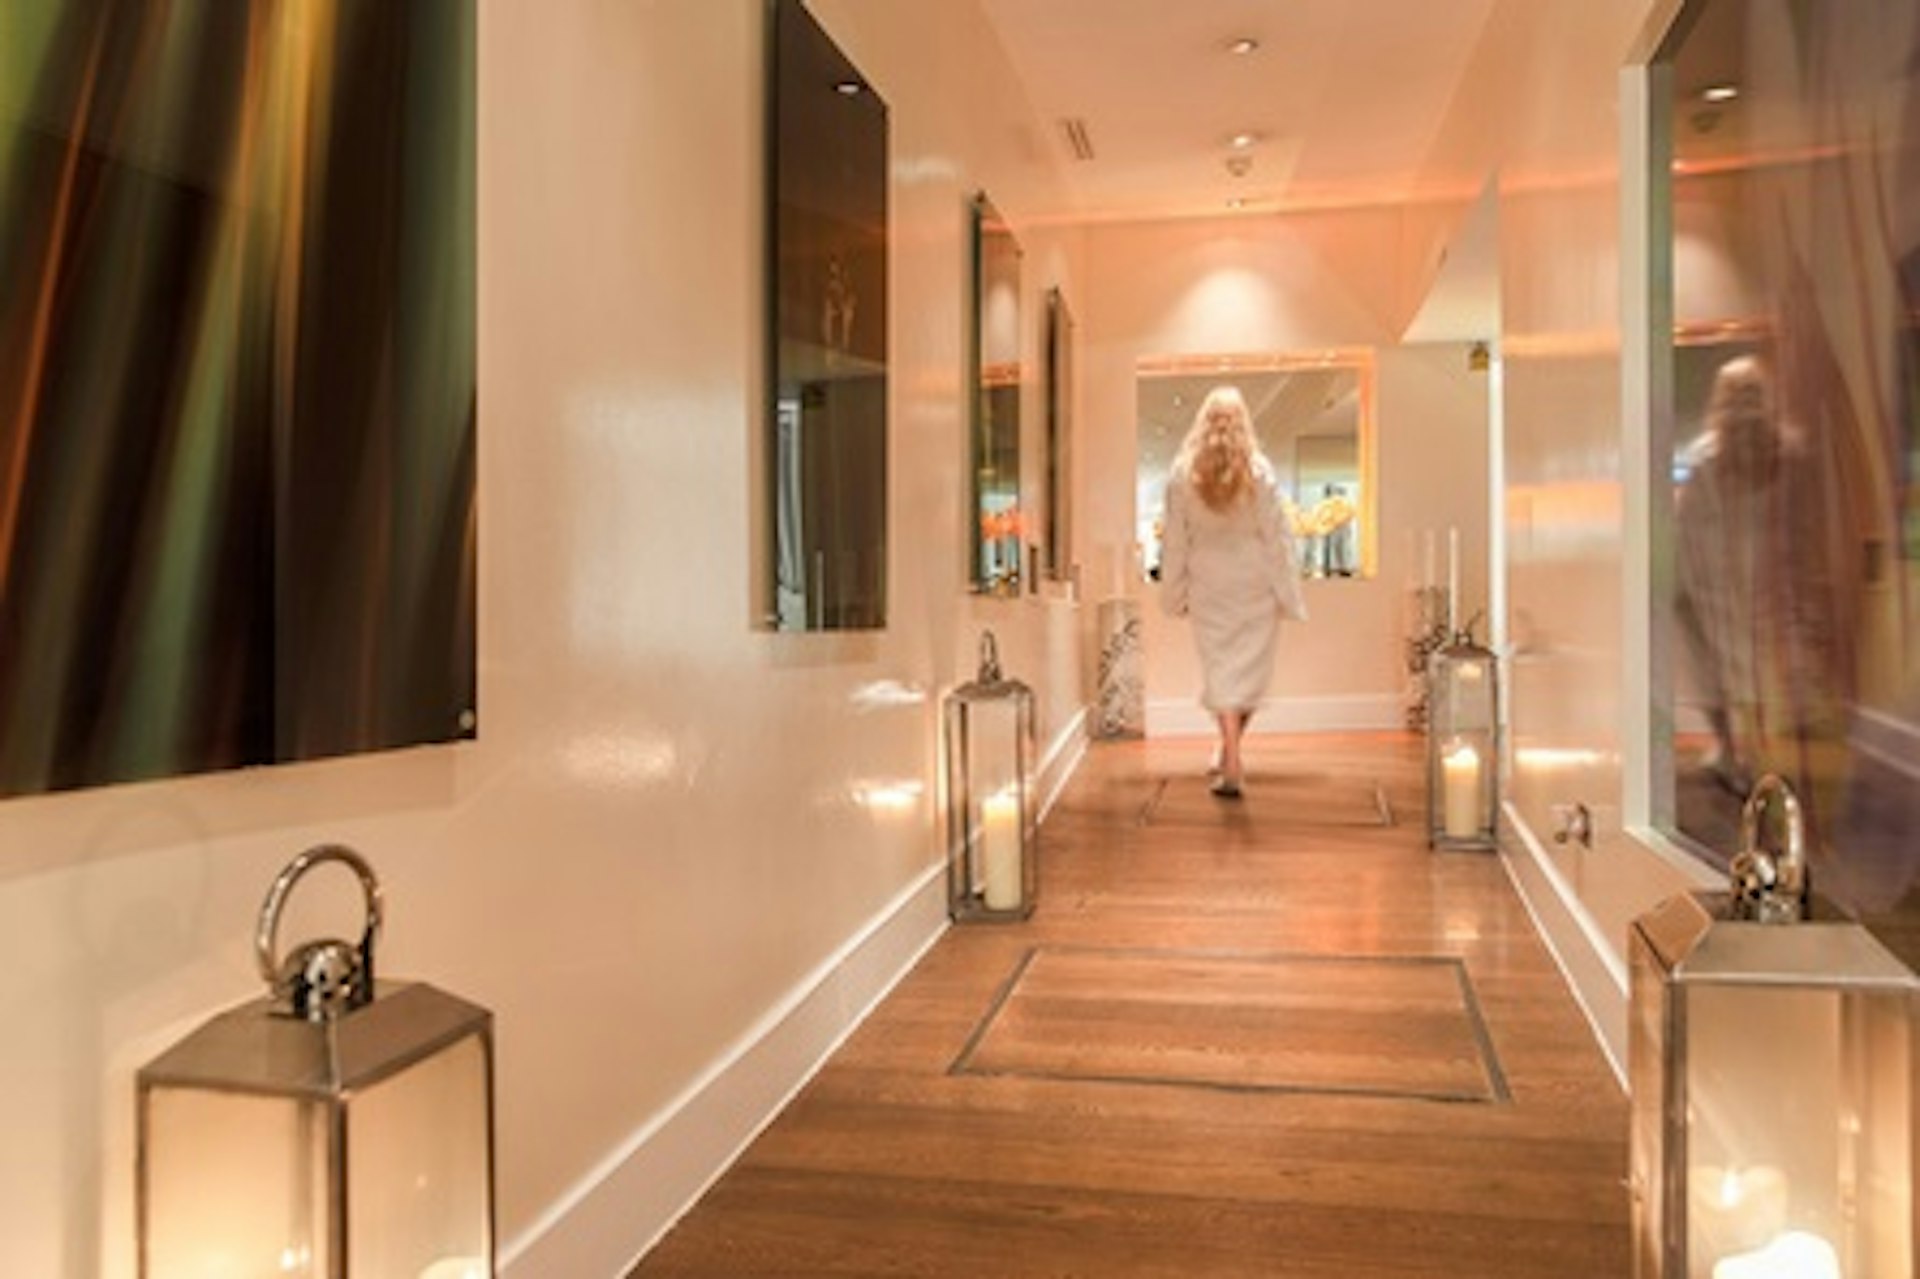 Weekend Spa Relaxation with Treatment and Prosecco at the 5* Montcalm Hotel, London Hotel, London 3